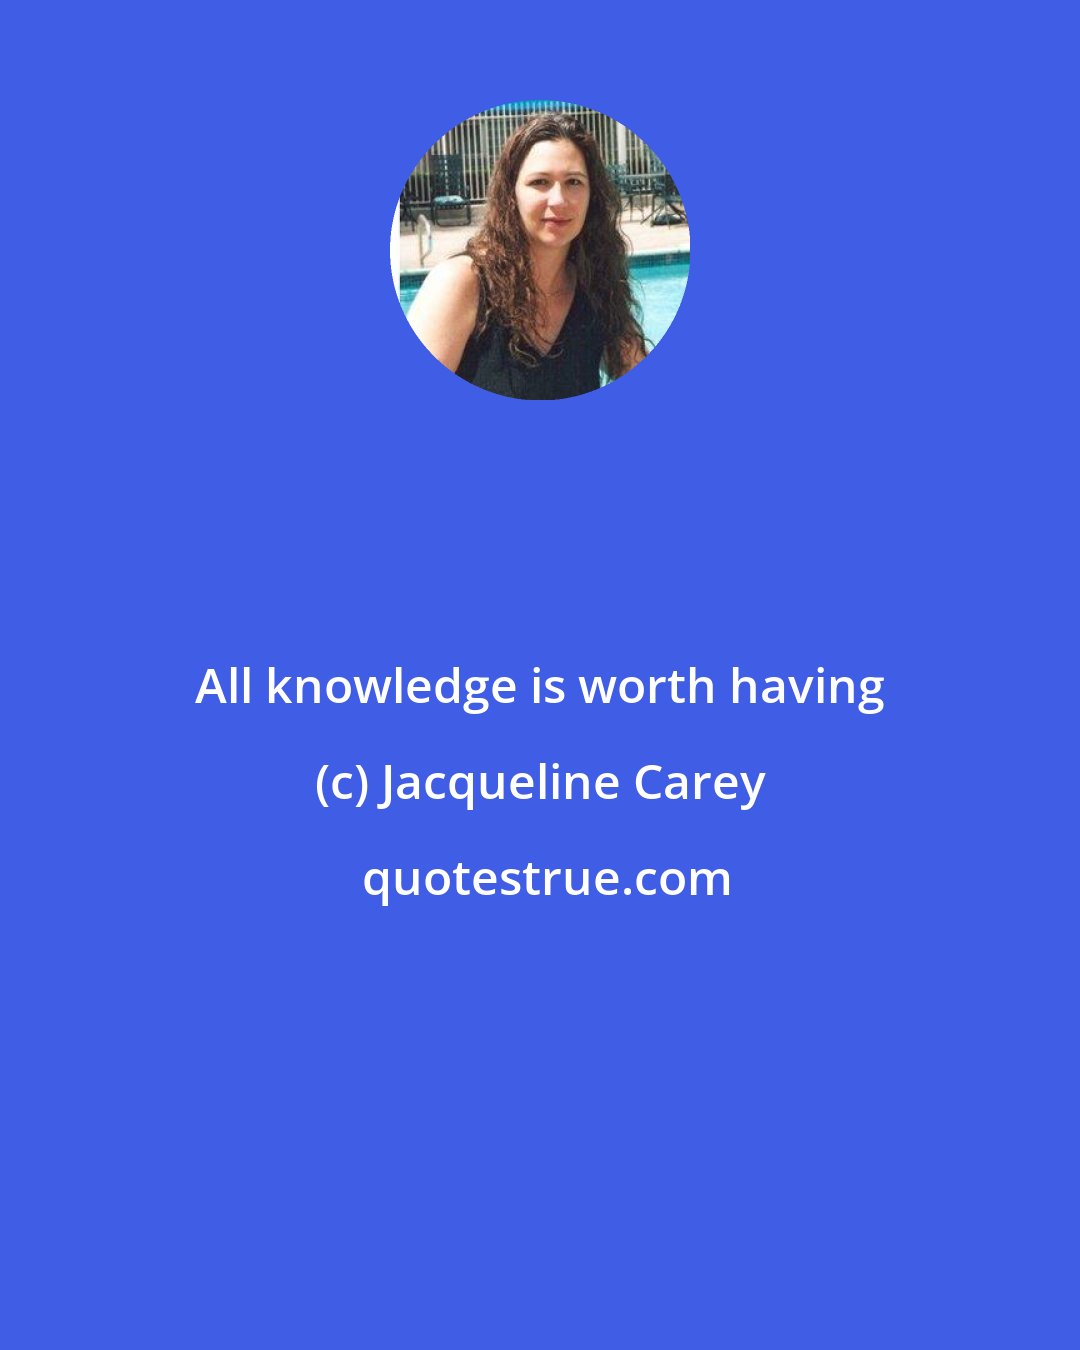 Jacqueline Carey: All knowledge is worth having